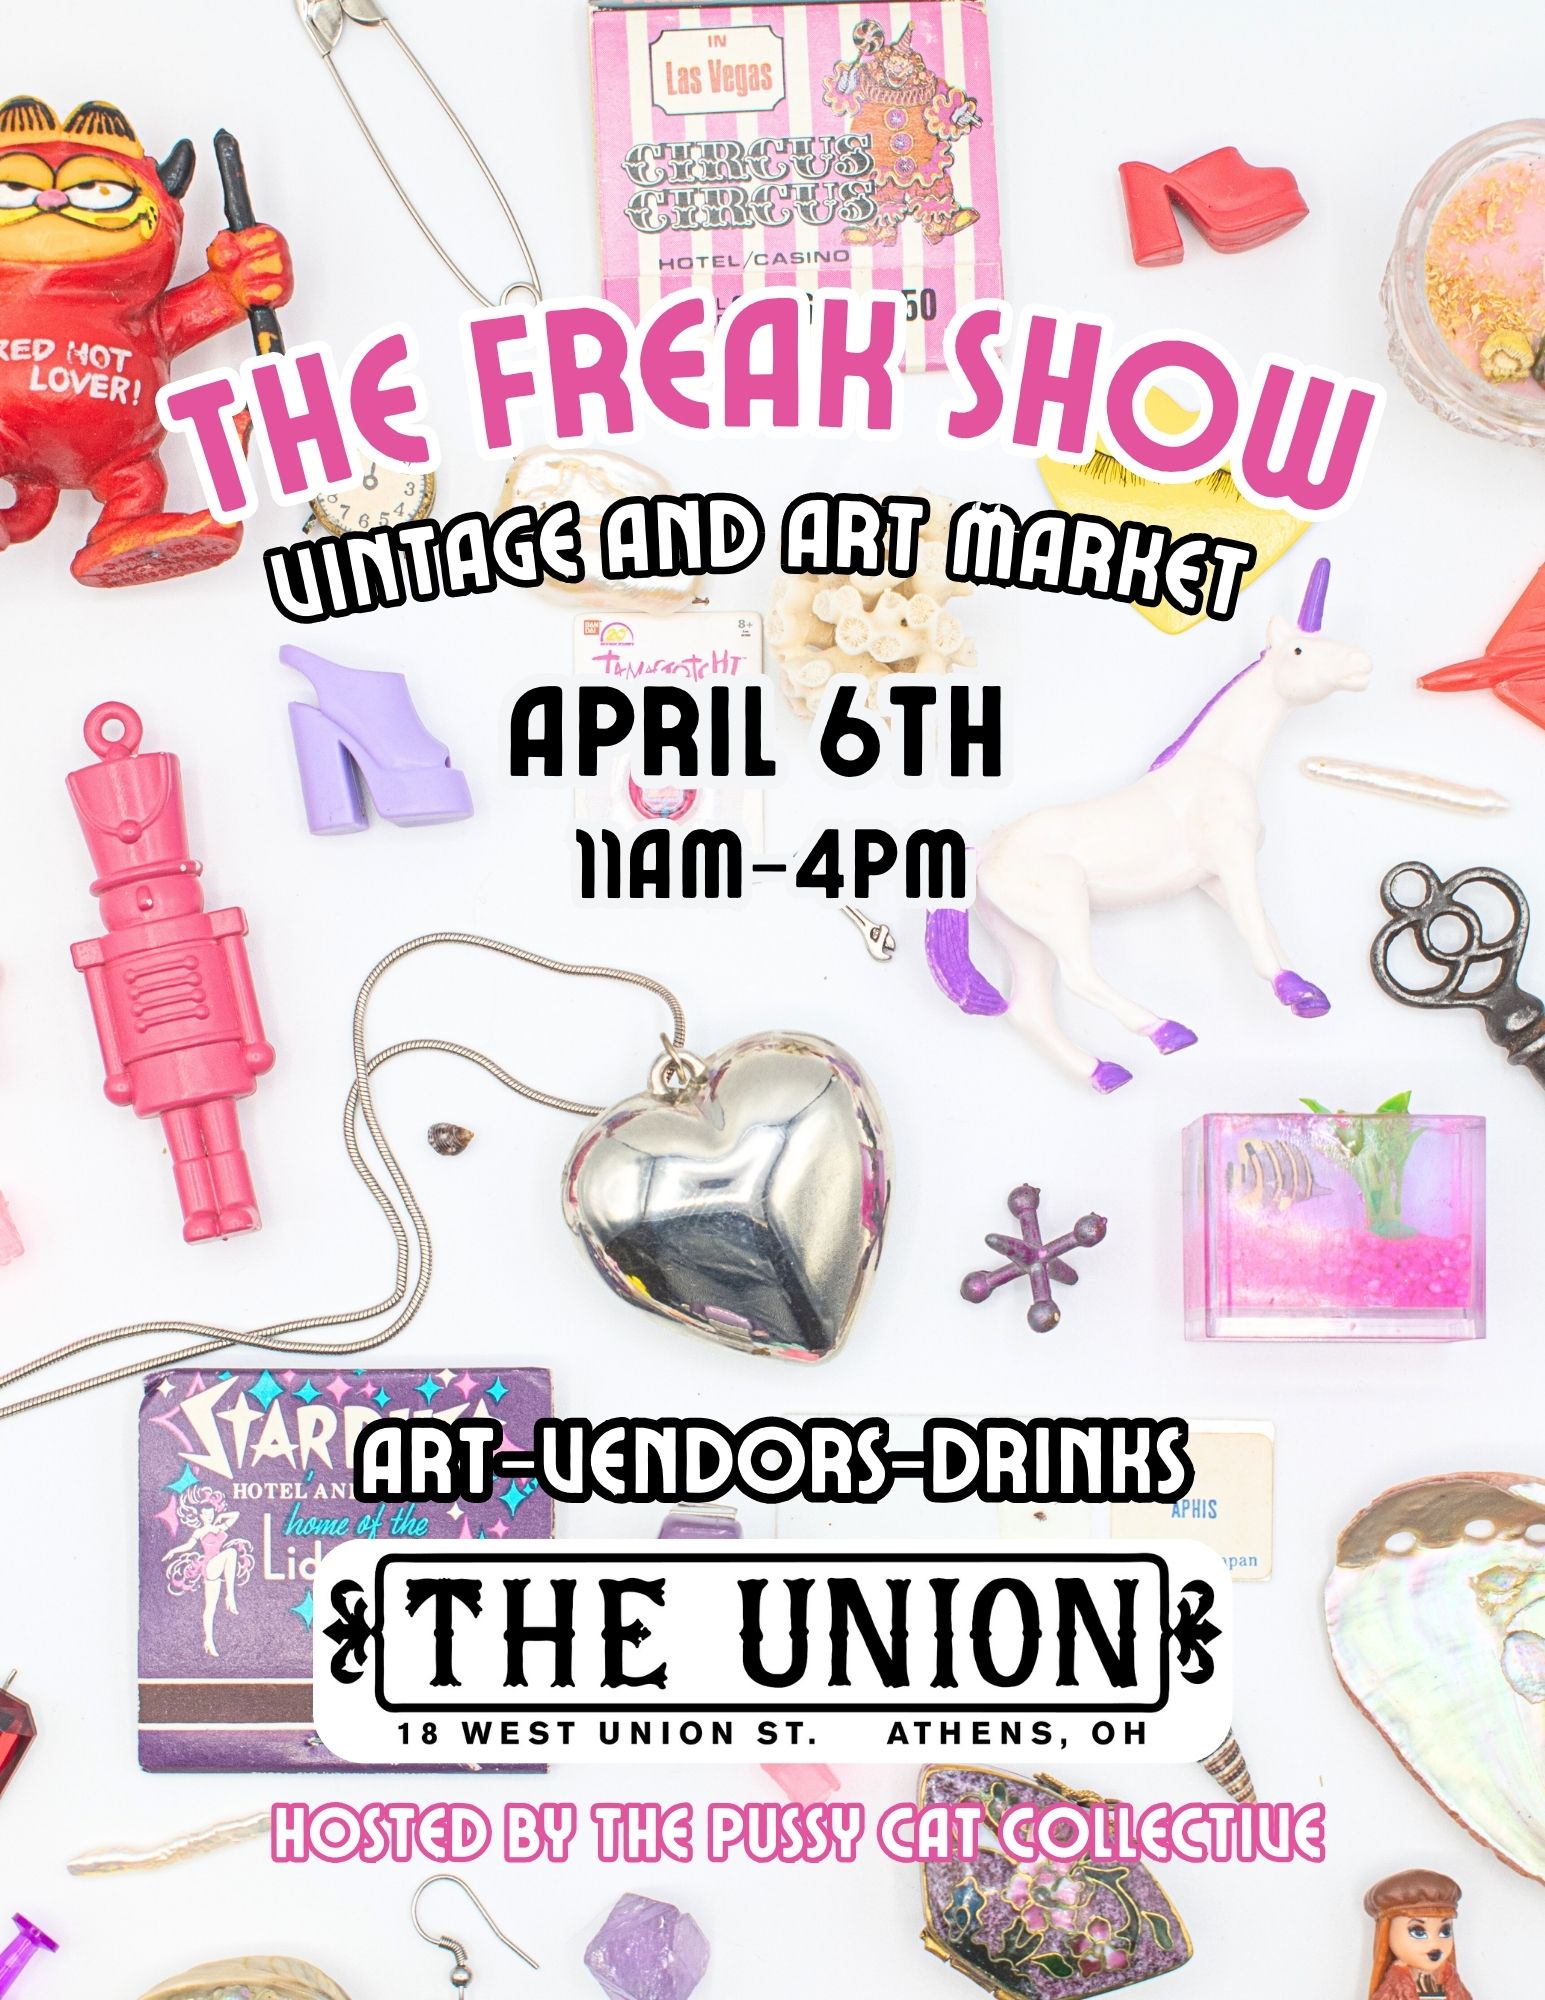 A flyer for the Freak Show, a vintage and art market.